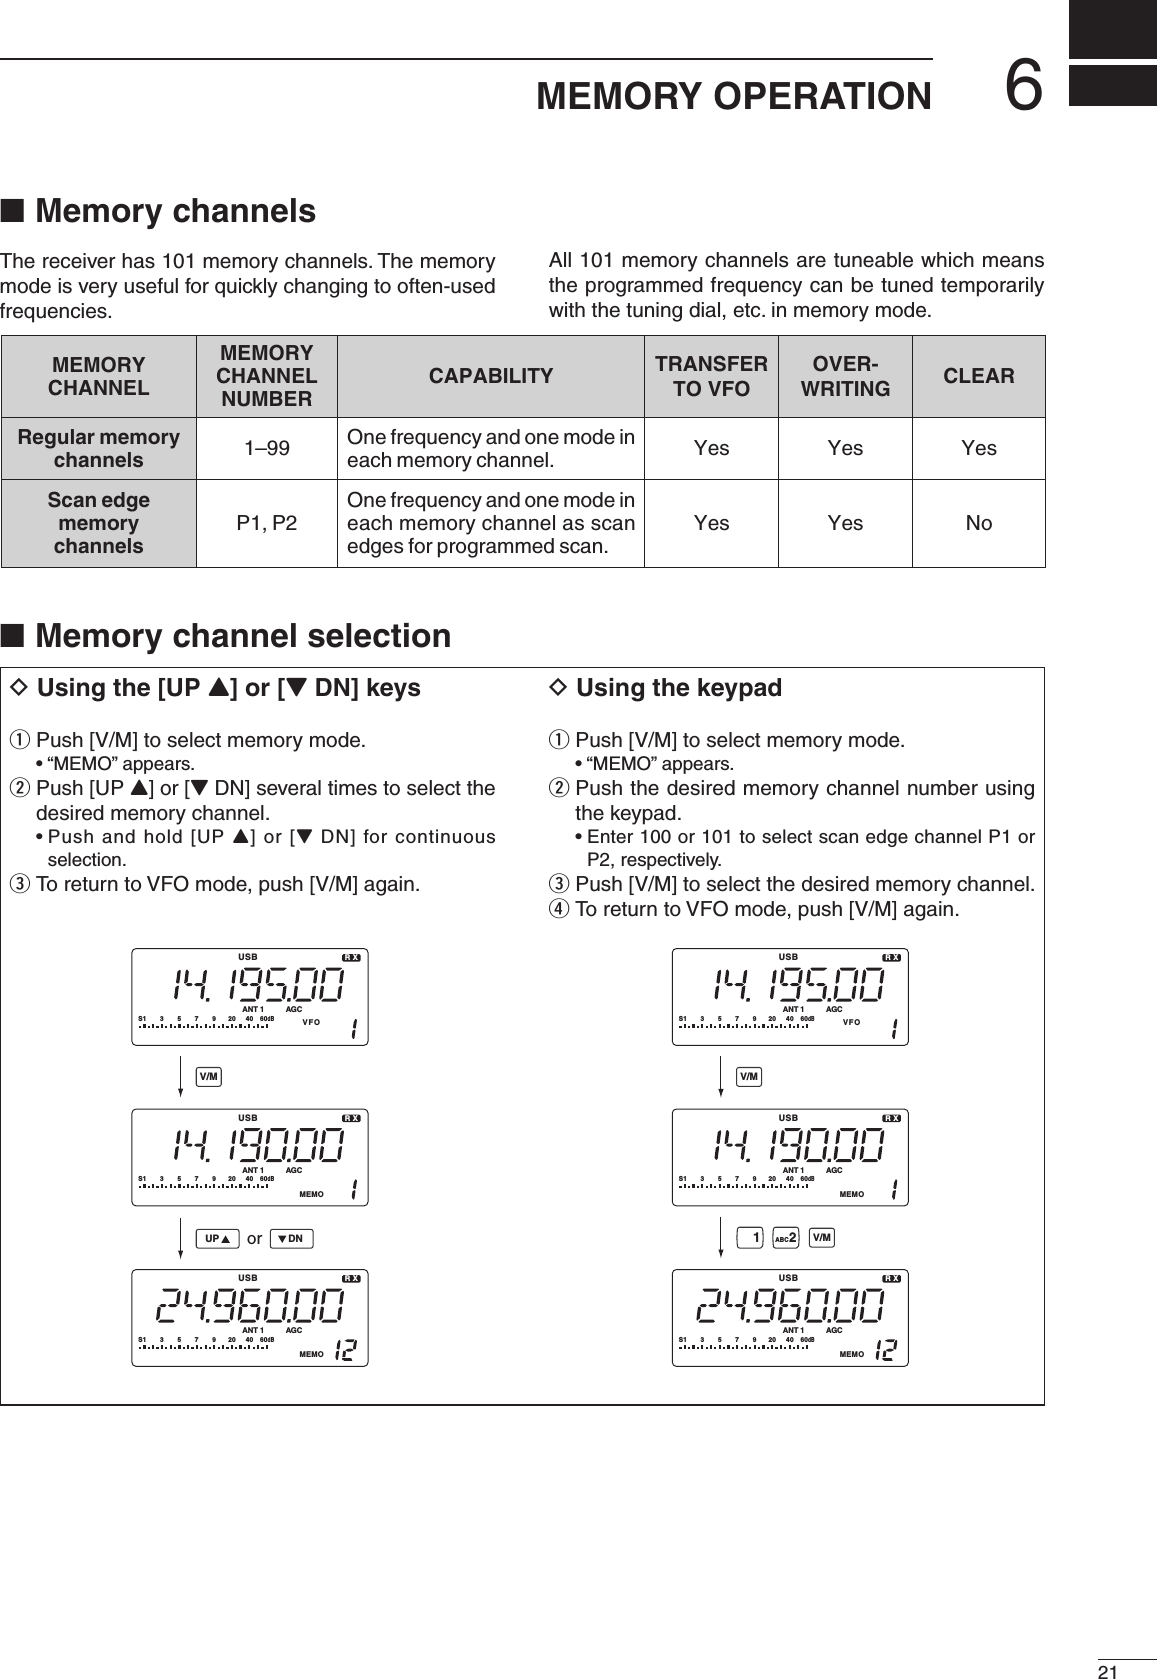 ■ Memory channelsThe receiver has 101 memory channels. The memory mode is very useful for quickly changing to often-used frequencies.All 101 memory channels are tuneable which means the programmed frequency can be tuned temporarily with the tuning dial, etc. in memory mode.■ Memory channel selection621MEMORY OPERATIONMEMORYCHANNELMEMORYCHANNELNUMBERCAPABILITY TRANSFERTO VFOOVER-WRITING CLEARRegular memorychannels 1–99 One frequency and one mode ineach memory channel. Yes Yes YesScan edgememorychannelsP1, P2One frequency and one mode ineach memory channel as scanedges for programmed scan.Yes Yes NoD Using the [UP Y] or [Z DN] keysq Push [V/M] to select memory mode.  • “MEMO” appears.w  Push [UP Y] or [Z DN] several times to select the desired memory channel.  •  Push and  hold [UP Y] or  [Z  DN]  for continuous selection.e To return to VFO mode, push [V/M] again.D Using the keypadq Push [V/M] to select memory mode.  • “MEMO” appears.w  Push the desired memory channel number using the keypad.  •  Enter 100 or 101 to select scan edge channel P1 or P2, respectively.e Push [V/M] to select the desired memory channel.r To return to VFO mode, push [V/M] again.USBR XS1 3 57920 40 60dBAGCANTMEMO1USBR XS1 3 57920 40 60dBAGCANTMEMO1USBR XS1 3 57920 40 60dBAGCANTVFO1UP DNorV/MUSBR XS1 3 57920 40 60dBAGCANTMEMO1USBR XS1 3 57920 40 60dBAGCANTMEMO1USBR XS1 3 57920 40 60dBAGCANTVFO11 2ABCV/MV/M